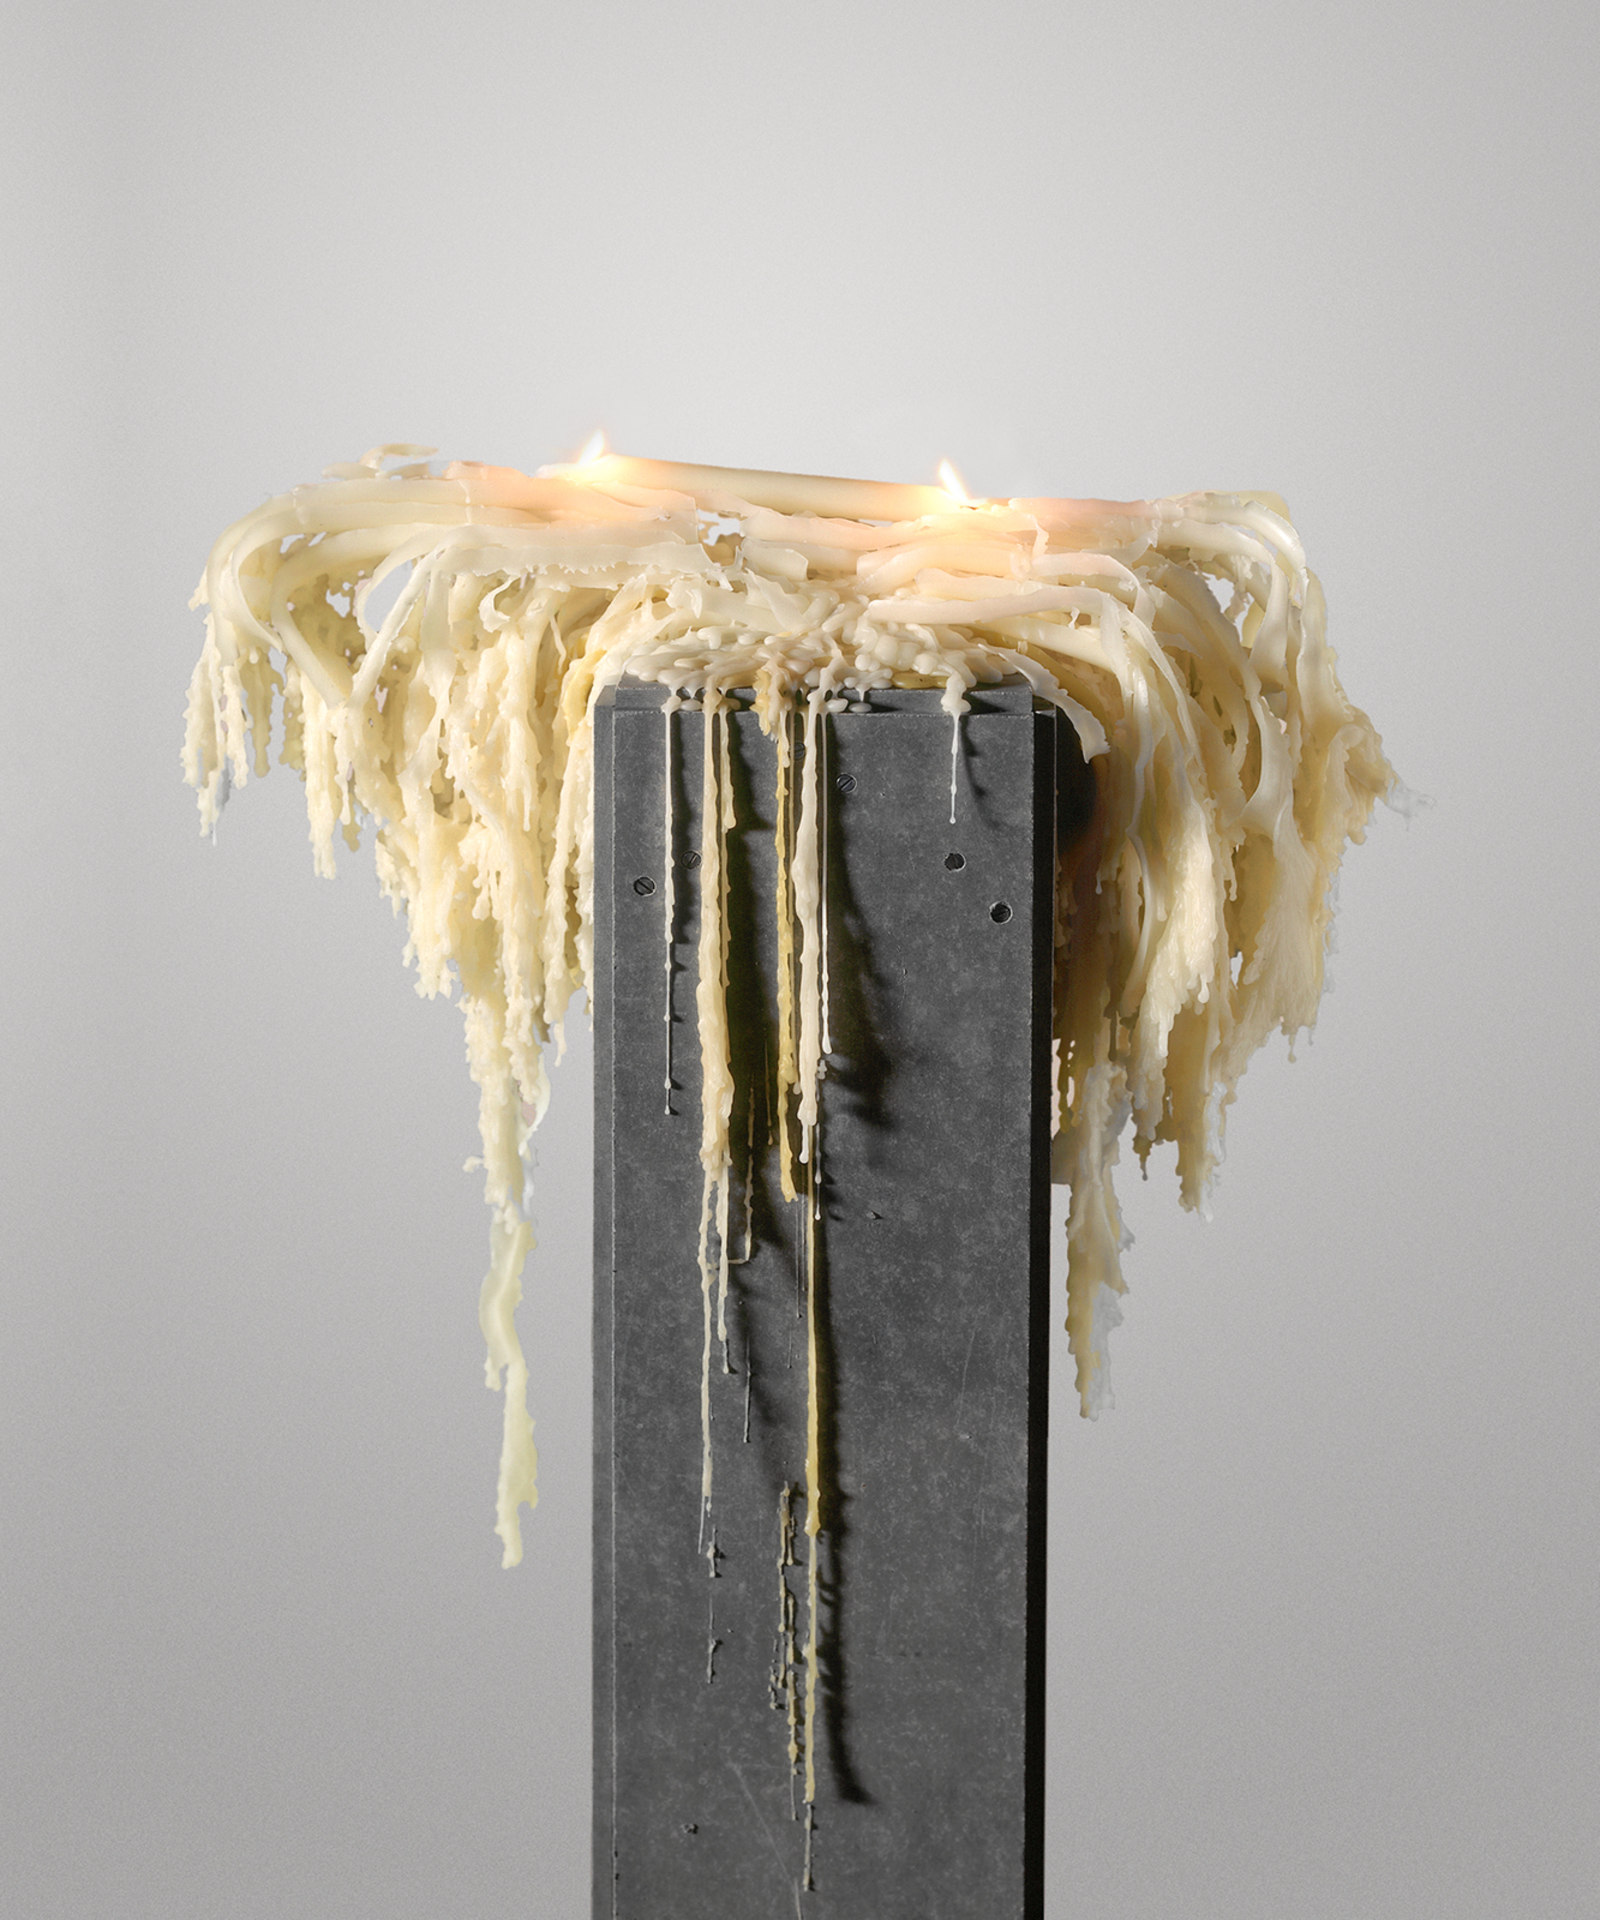 Untitled (Candle)